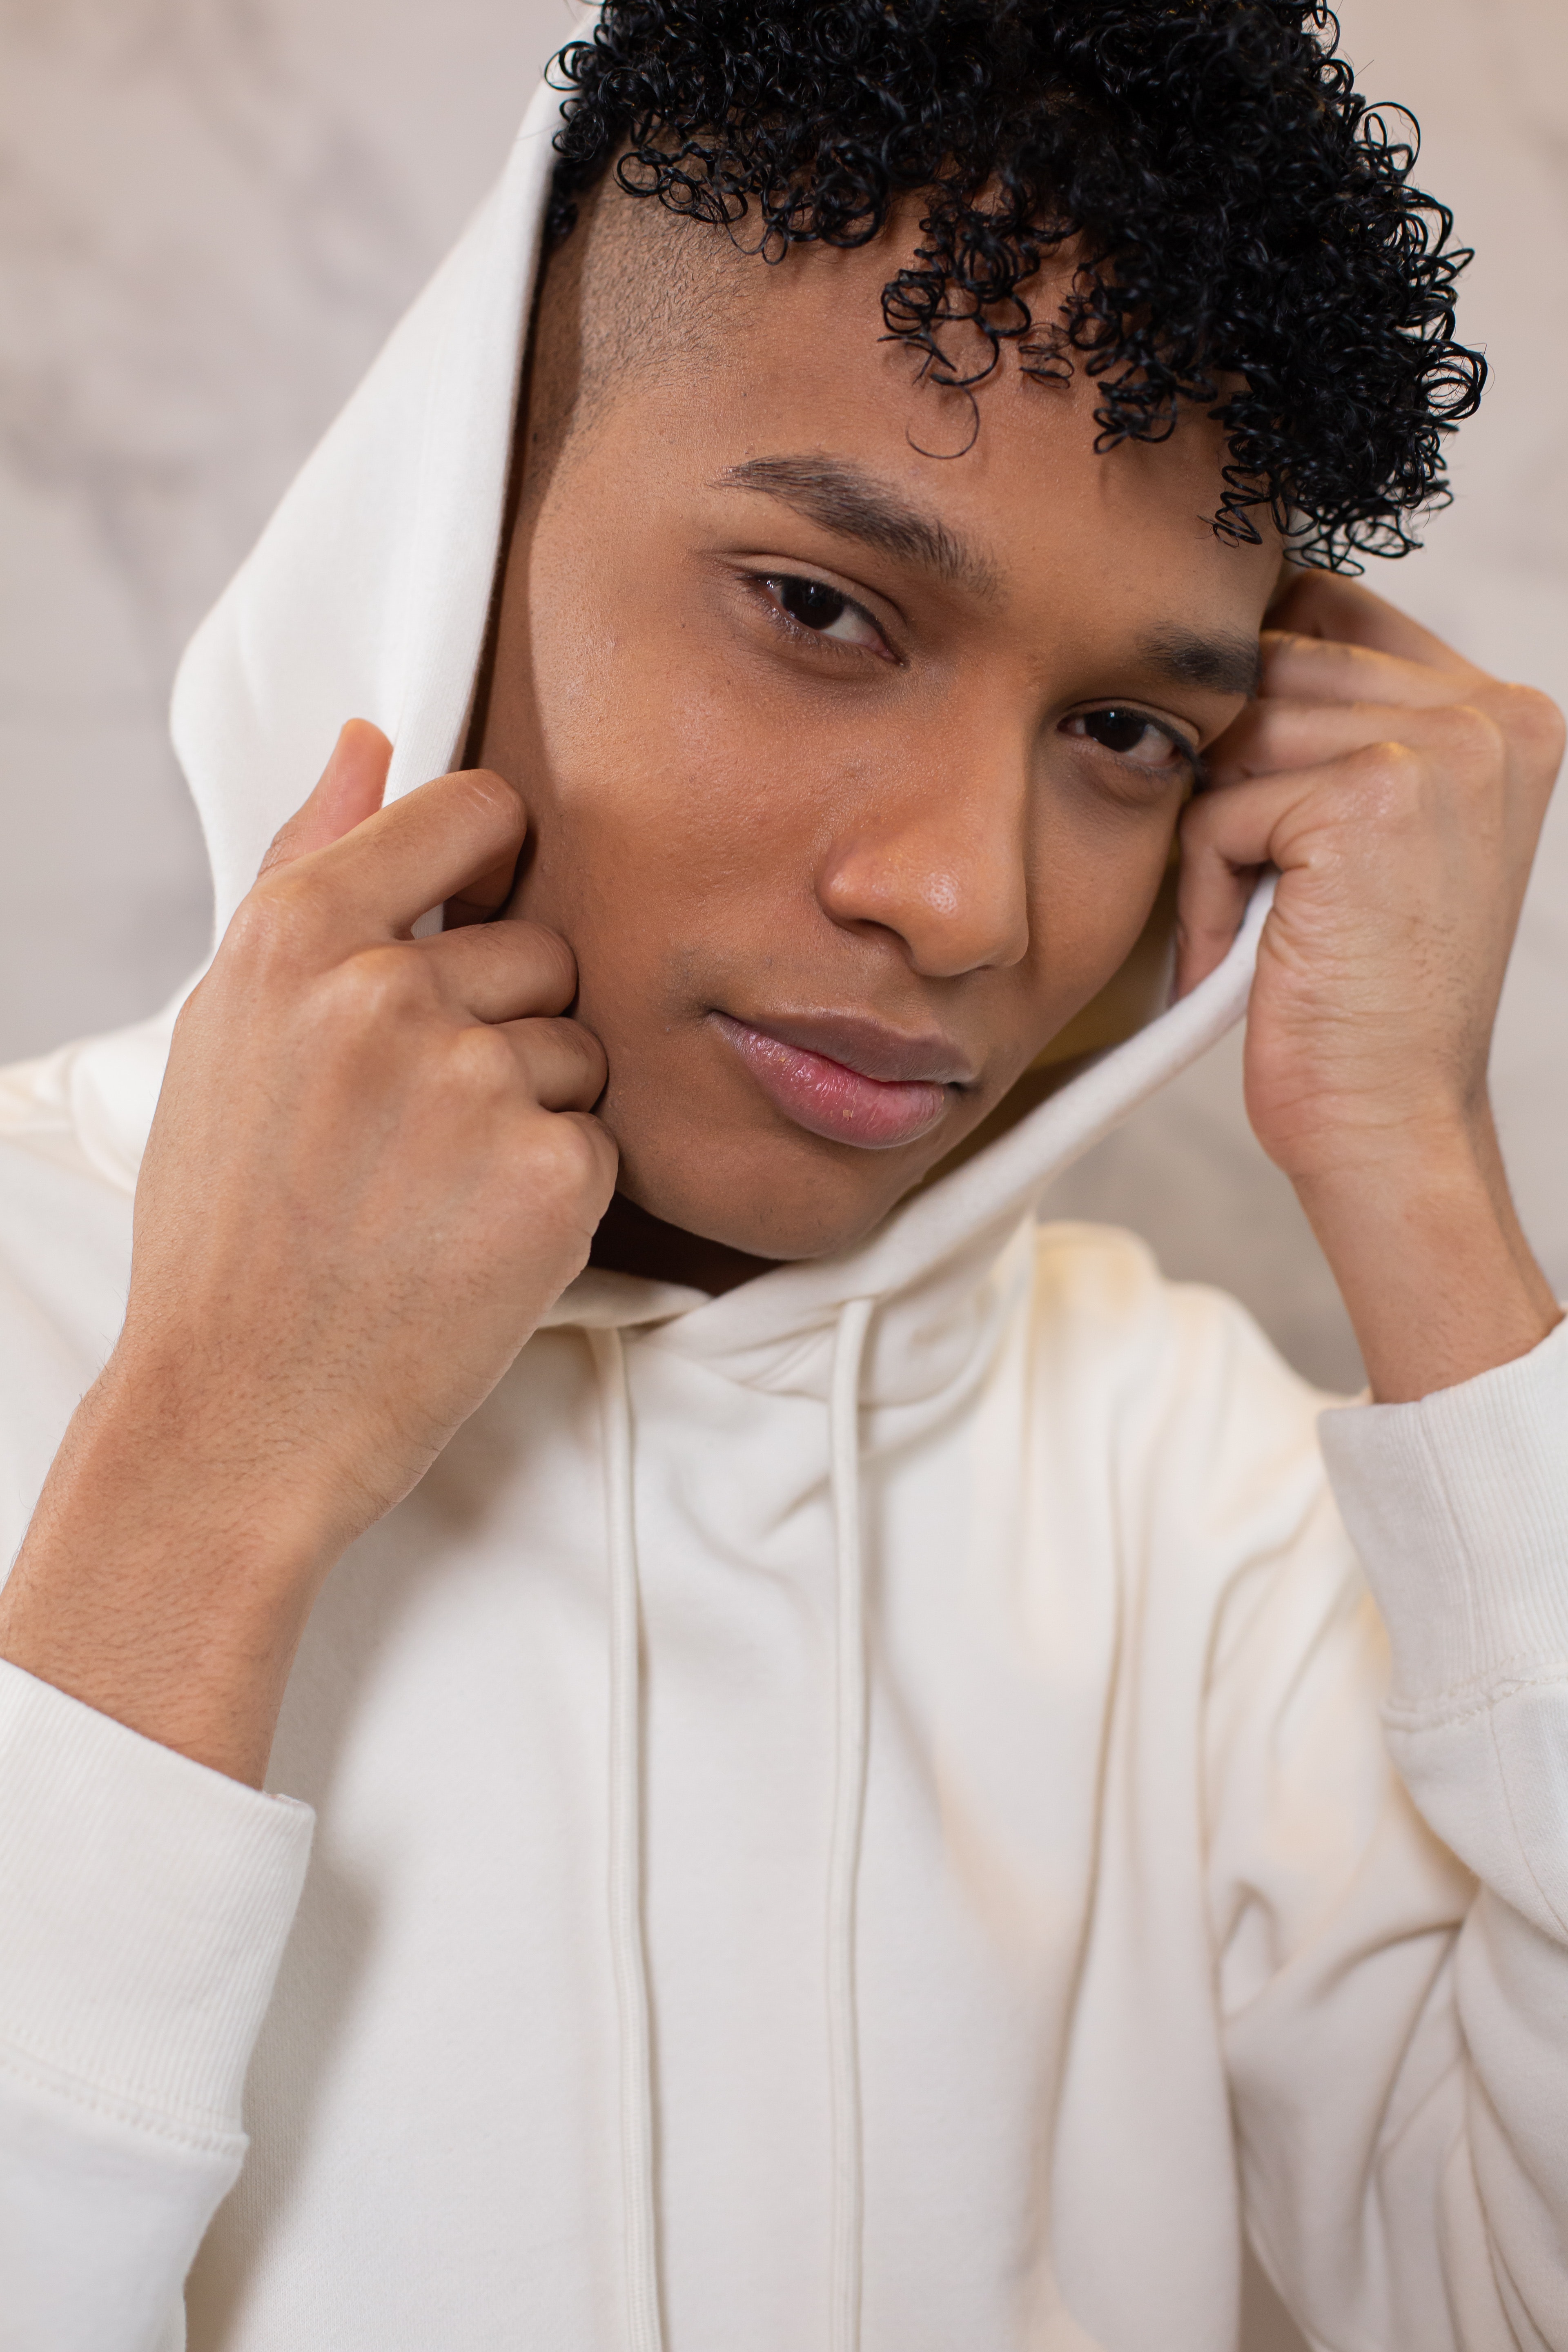 Black man with curly hair in hood · Free